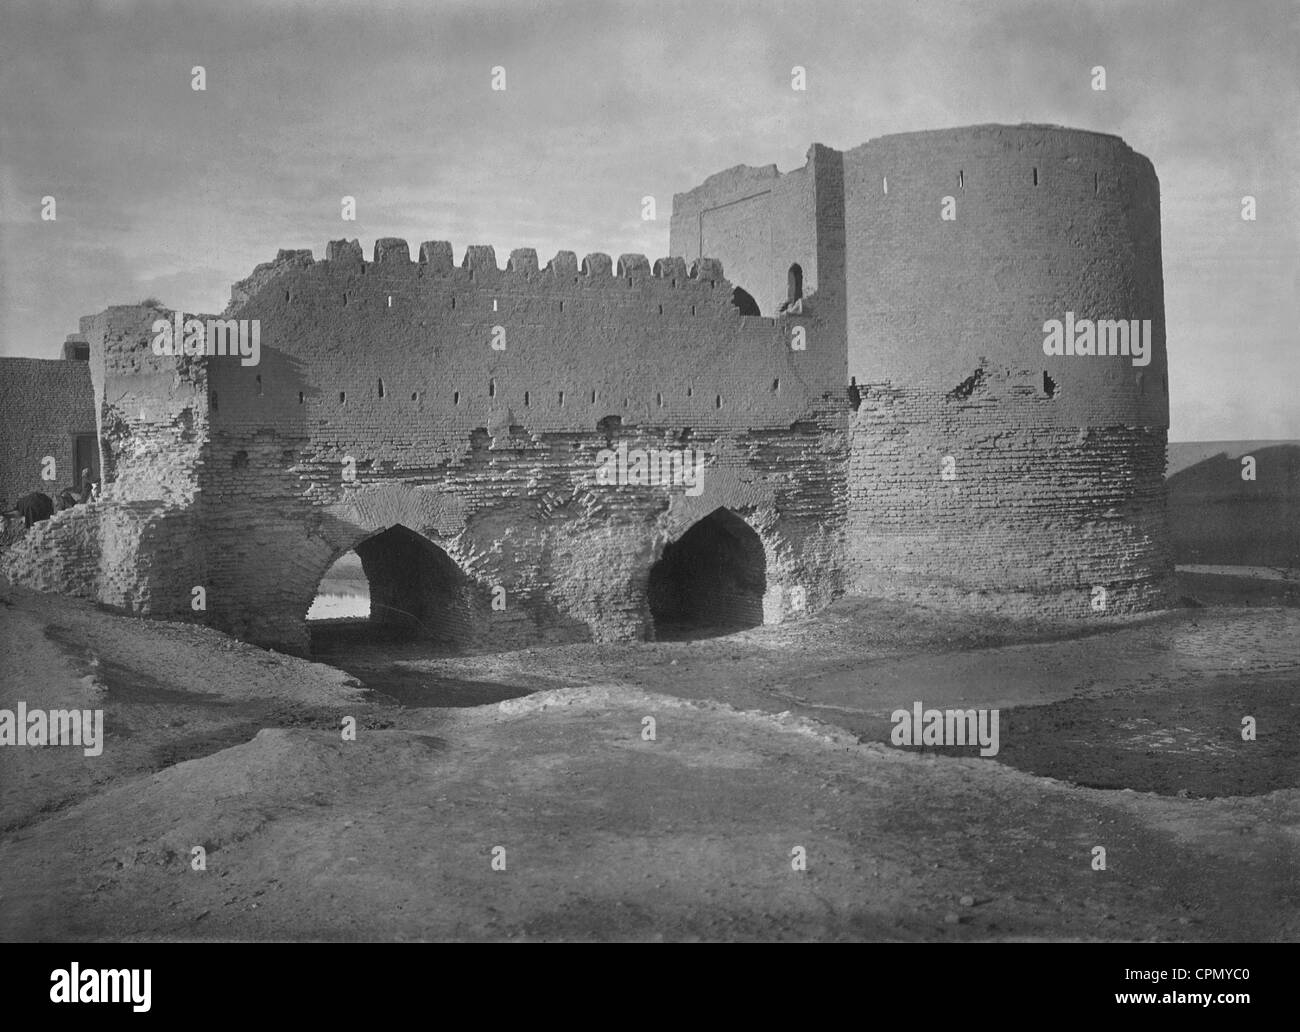 Mosul Black and White Stock Photos & Images - Alamy